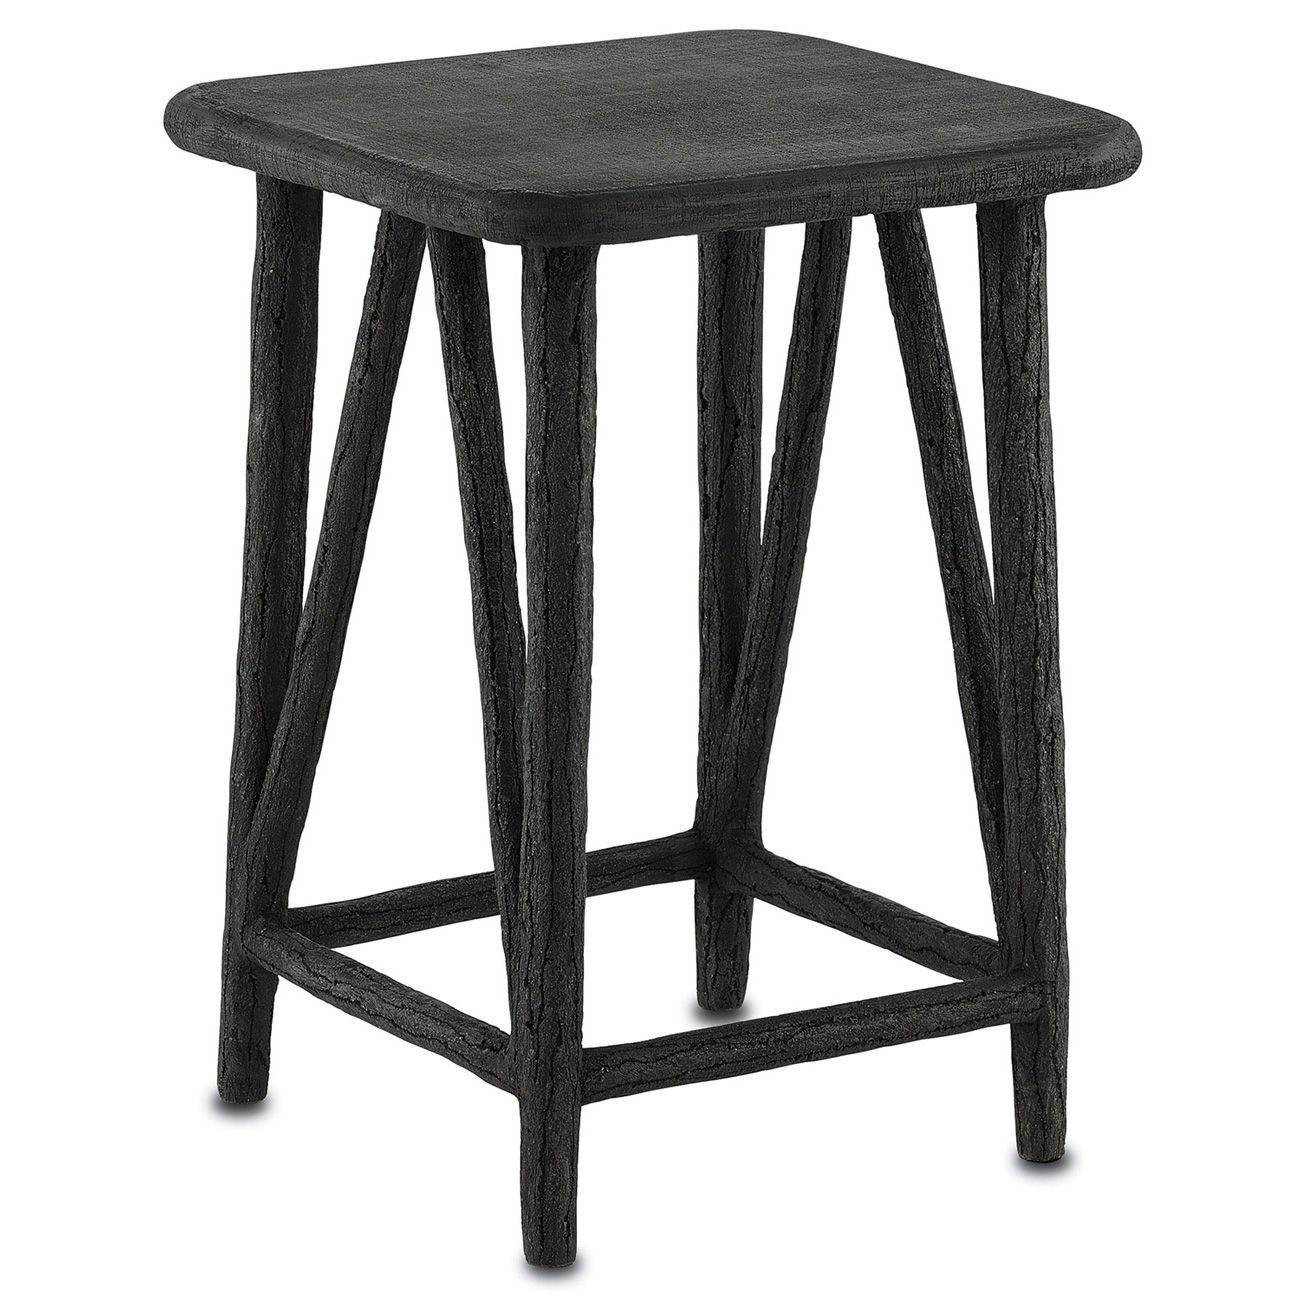 Kathy Kuo Home Naomi Modern Classic Distressed Black Concrete Outdoor In Black Iron Outdoor Accent Tables (View 4 of 15)